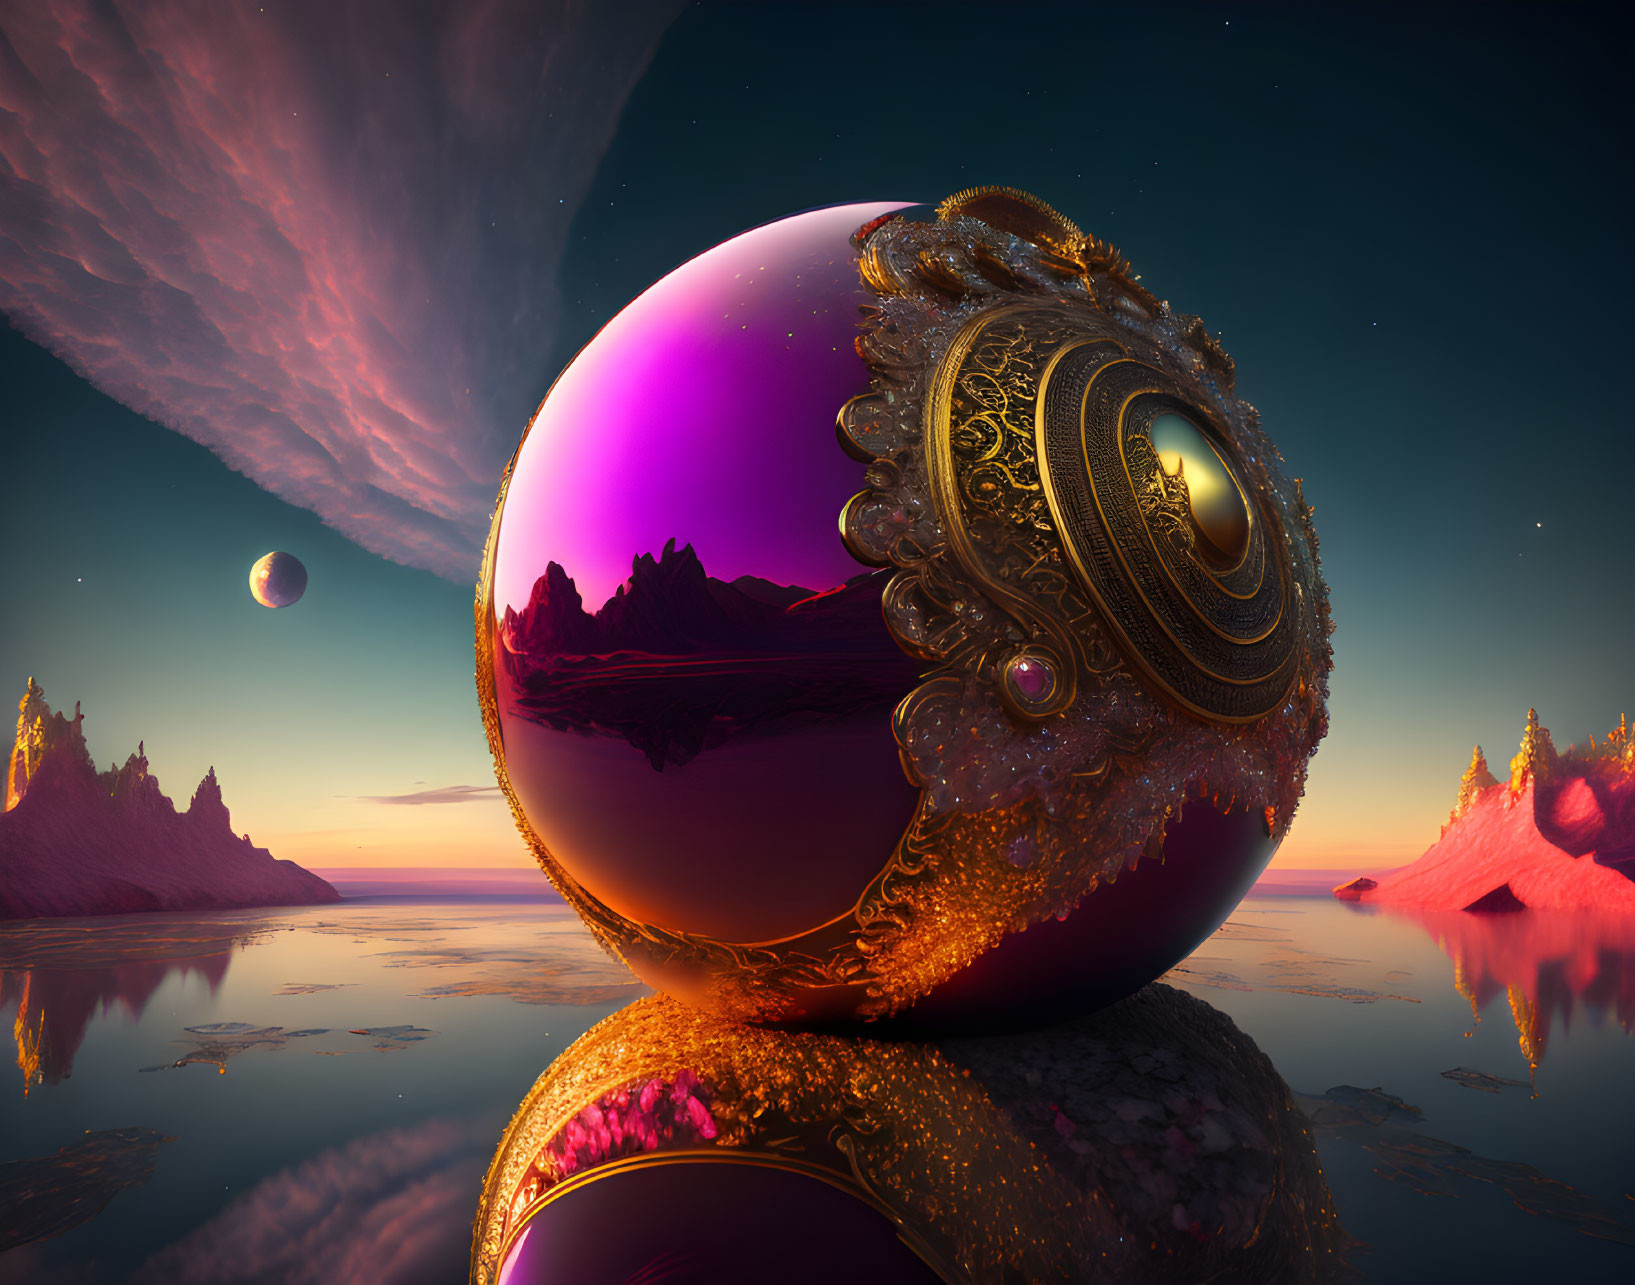 Surreal landscape with golden orb, pink mountains, water, and planets